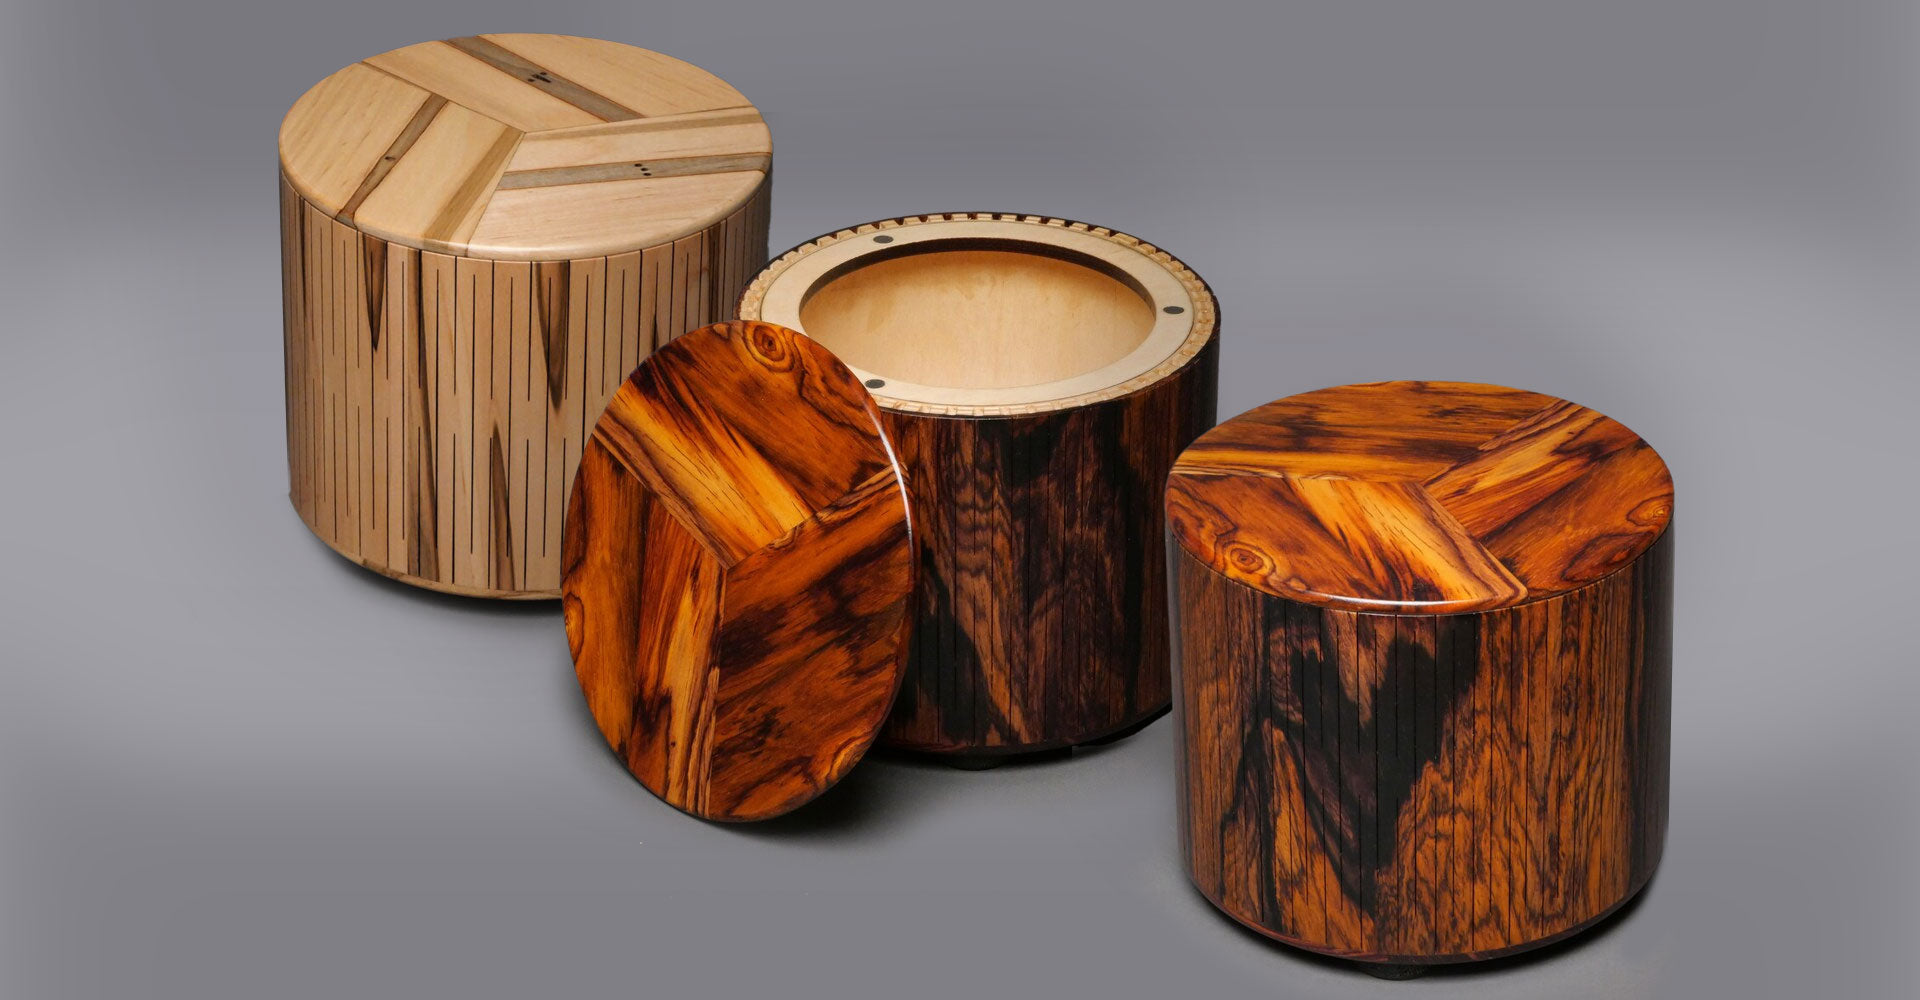 Beautiful Wooden Handcrafted Urns